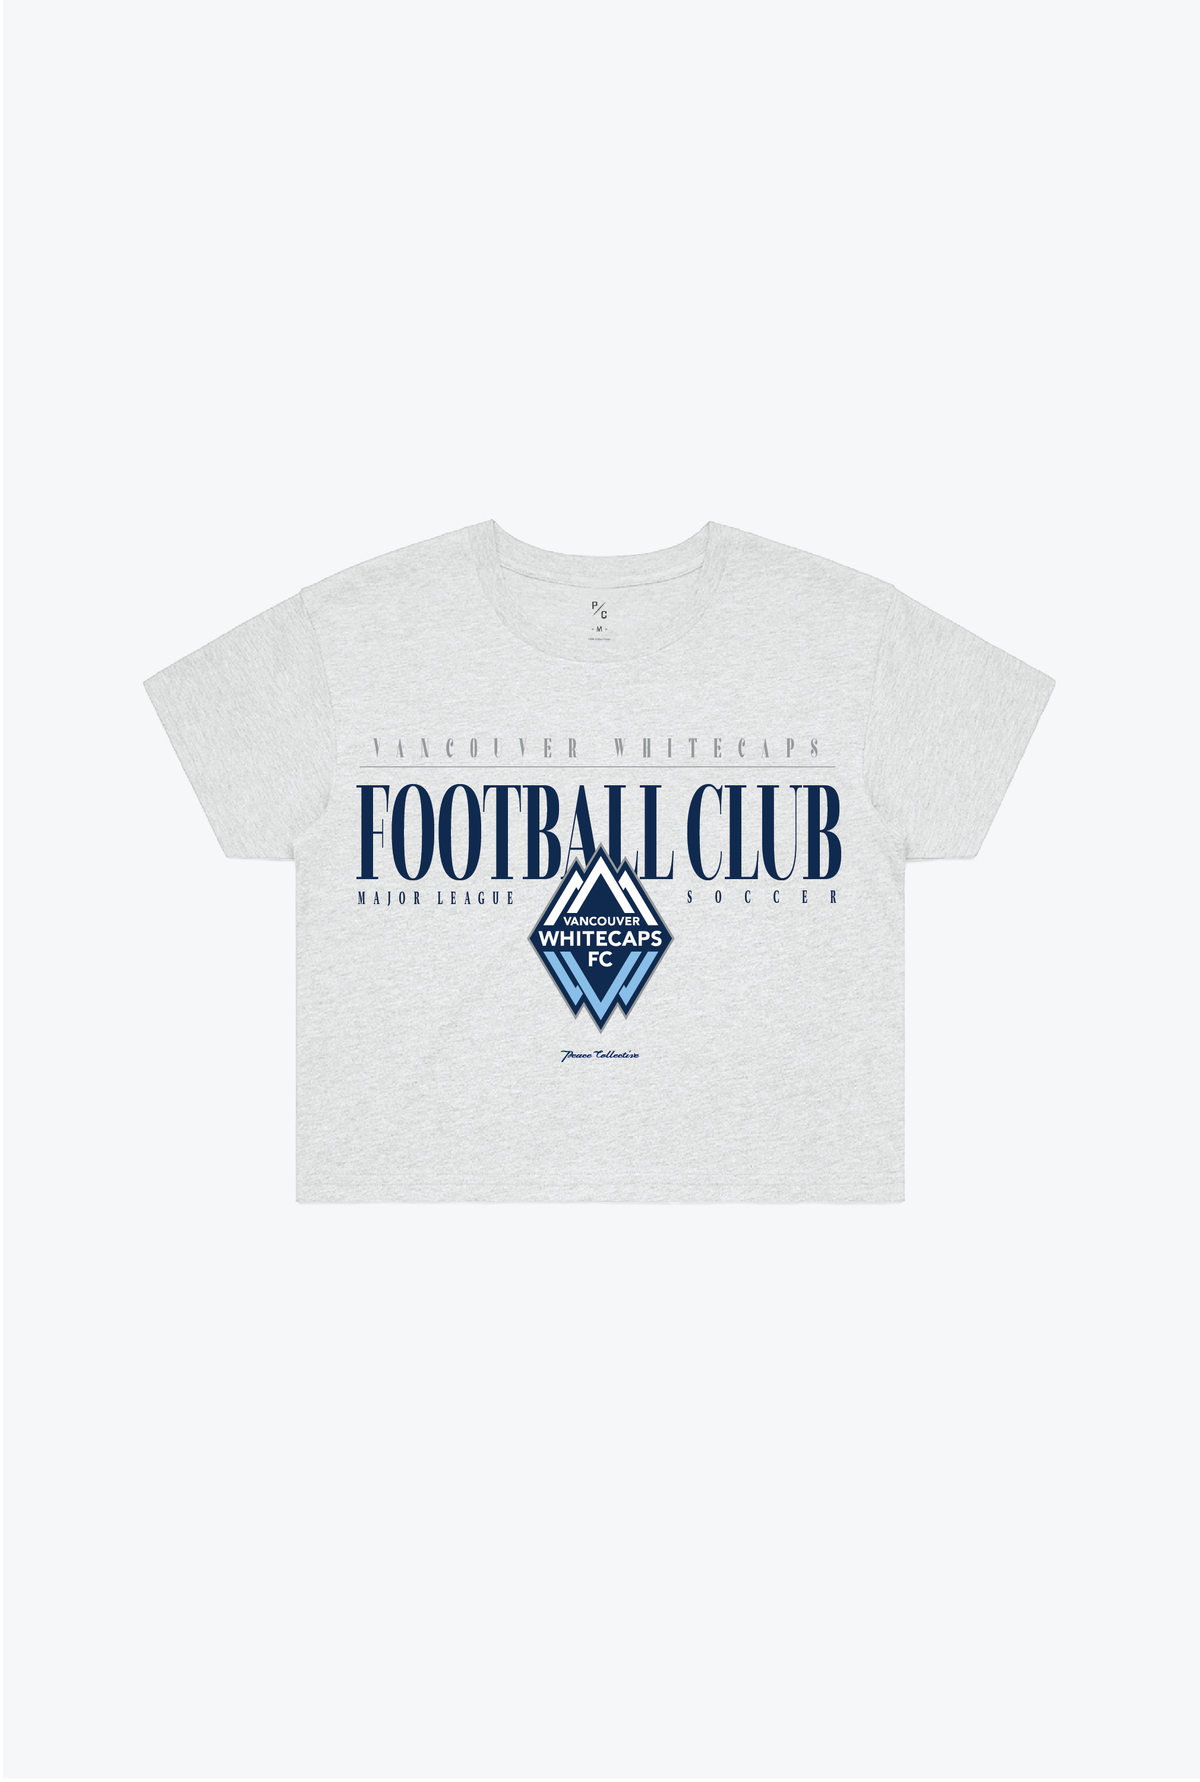 Vancouver Whitecaps FC Throwback Cropped T-Shirt - Ash